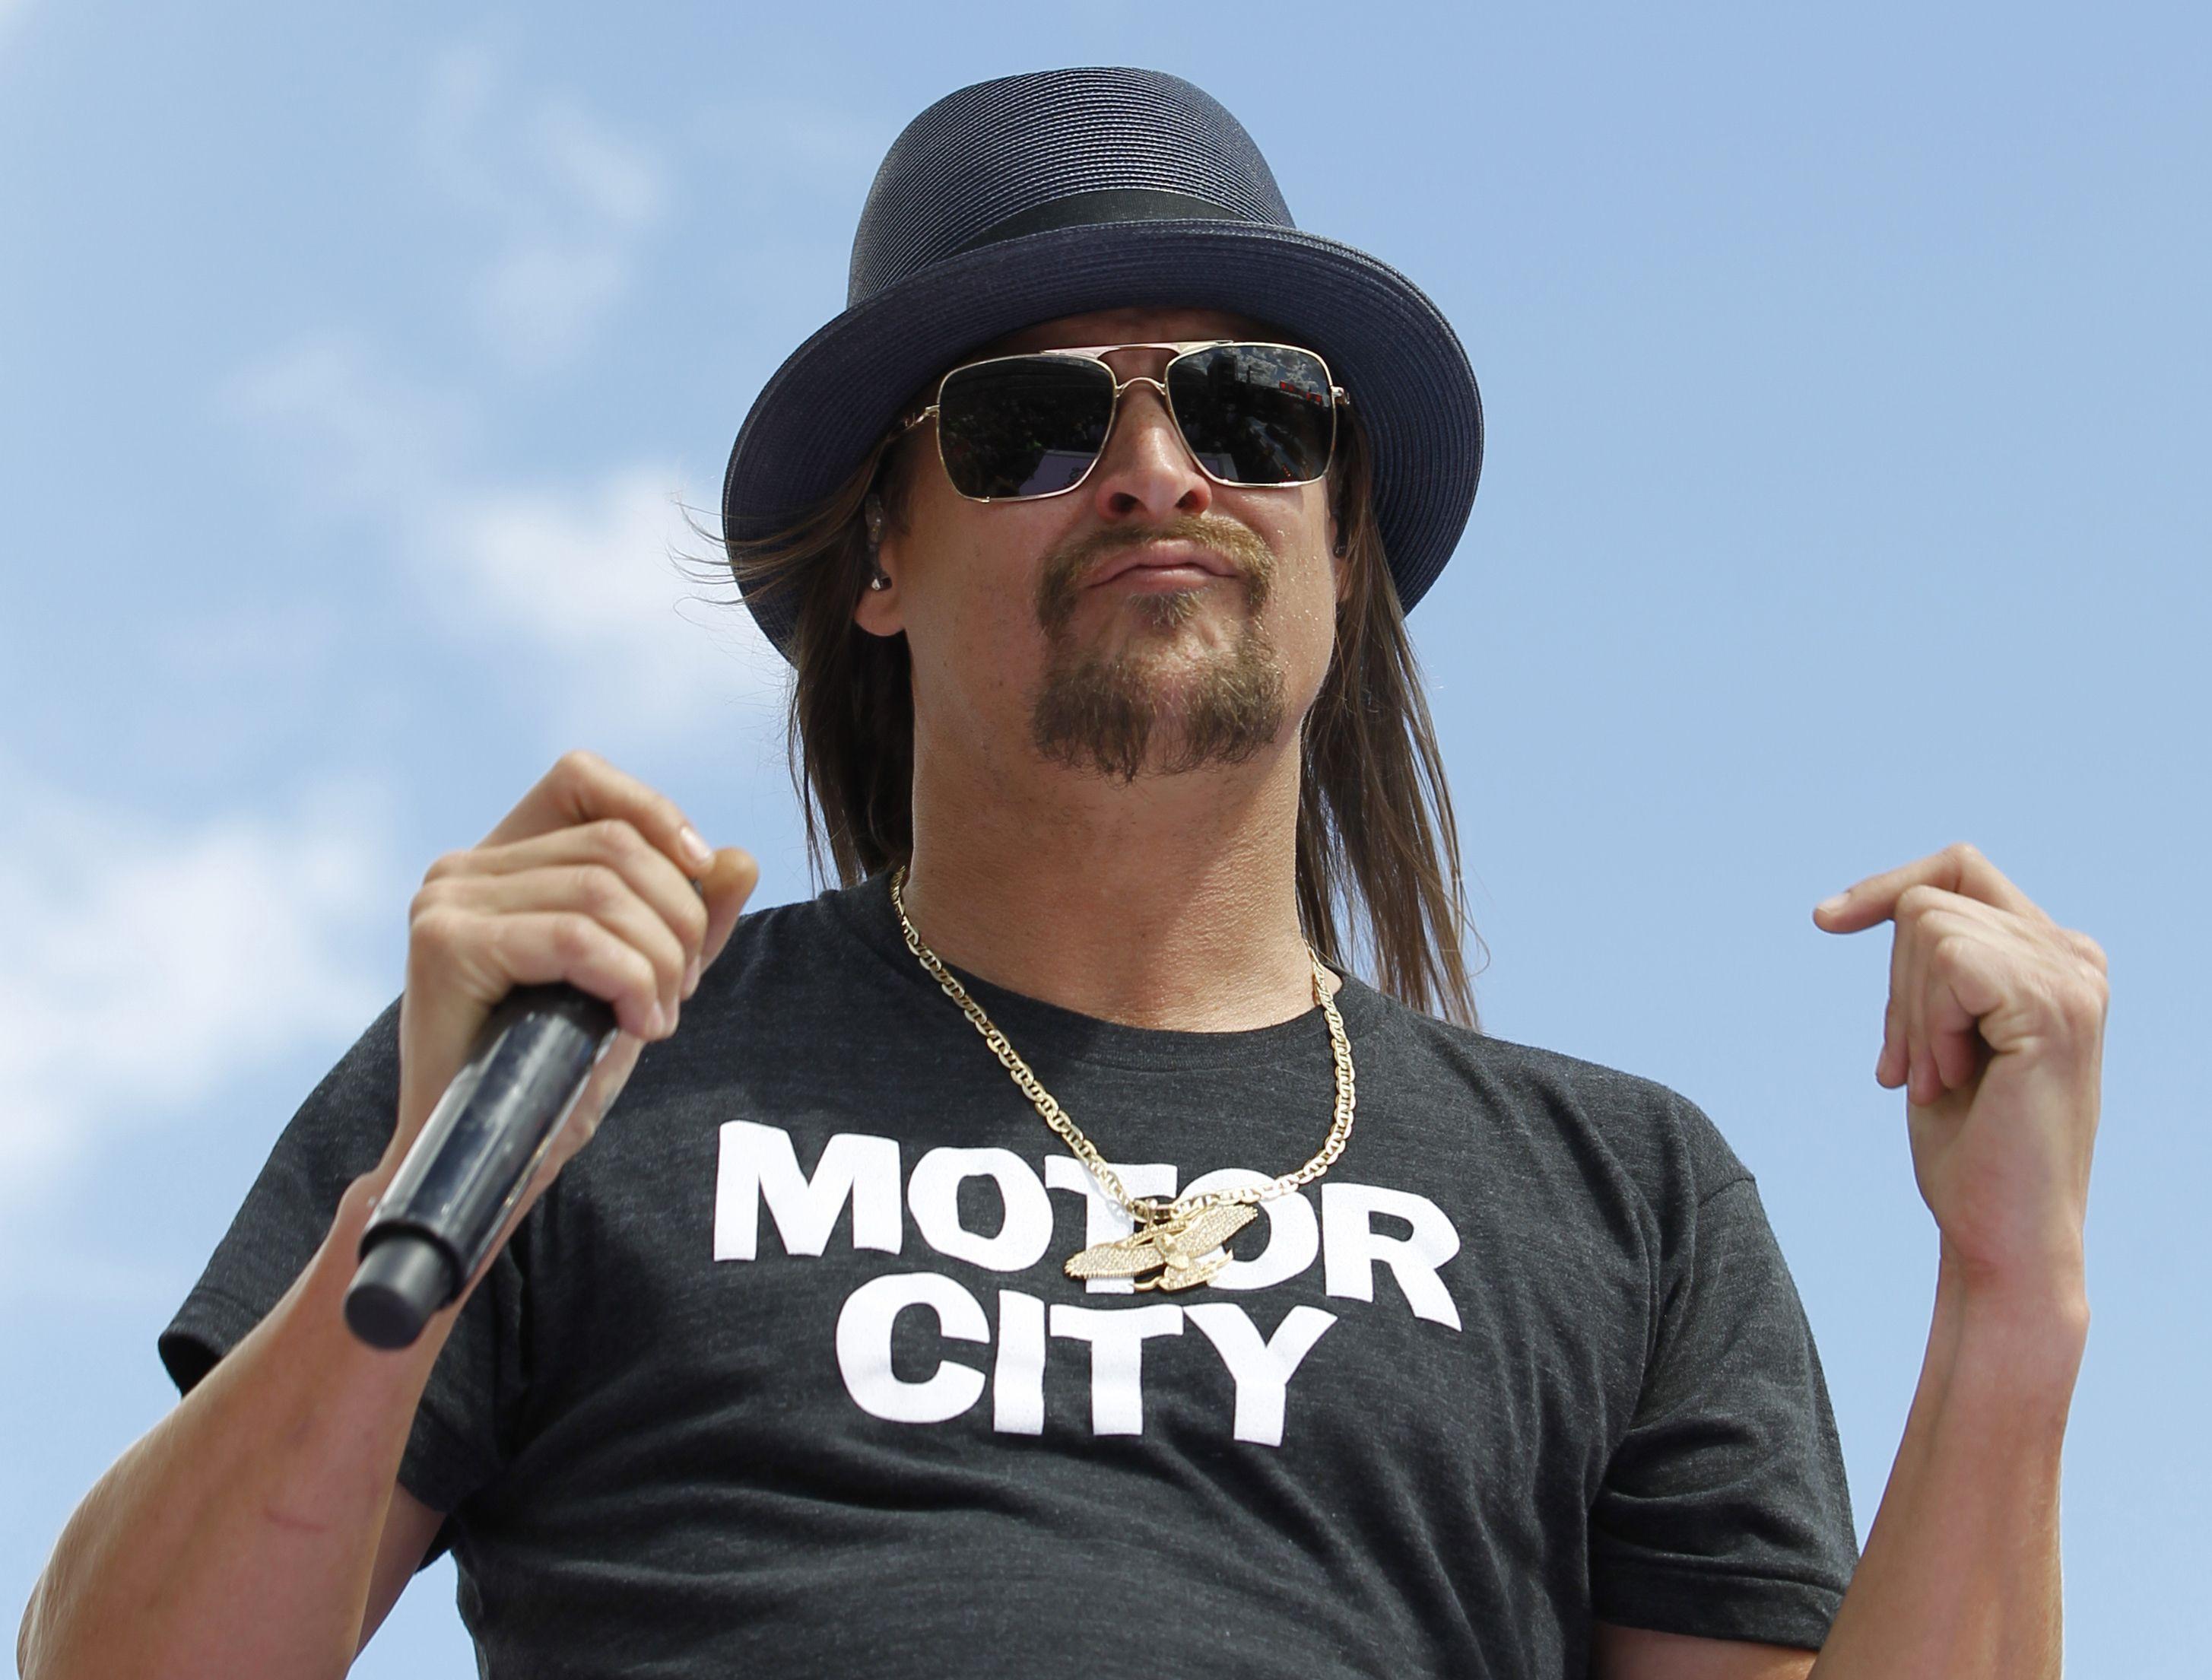 Kid Rock Wallpapers Image Photos Pictures Backgrounds